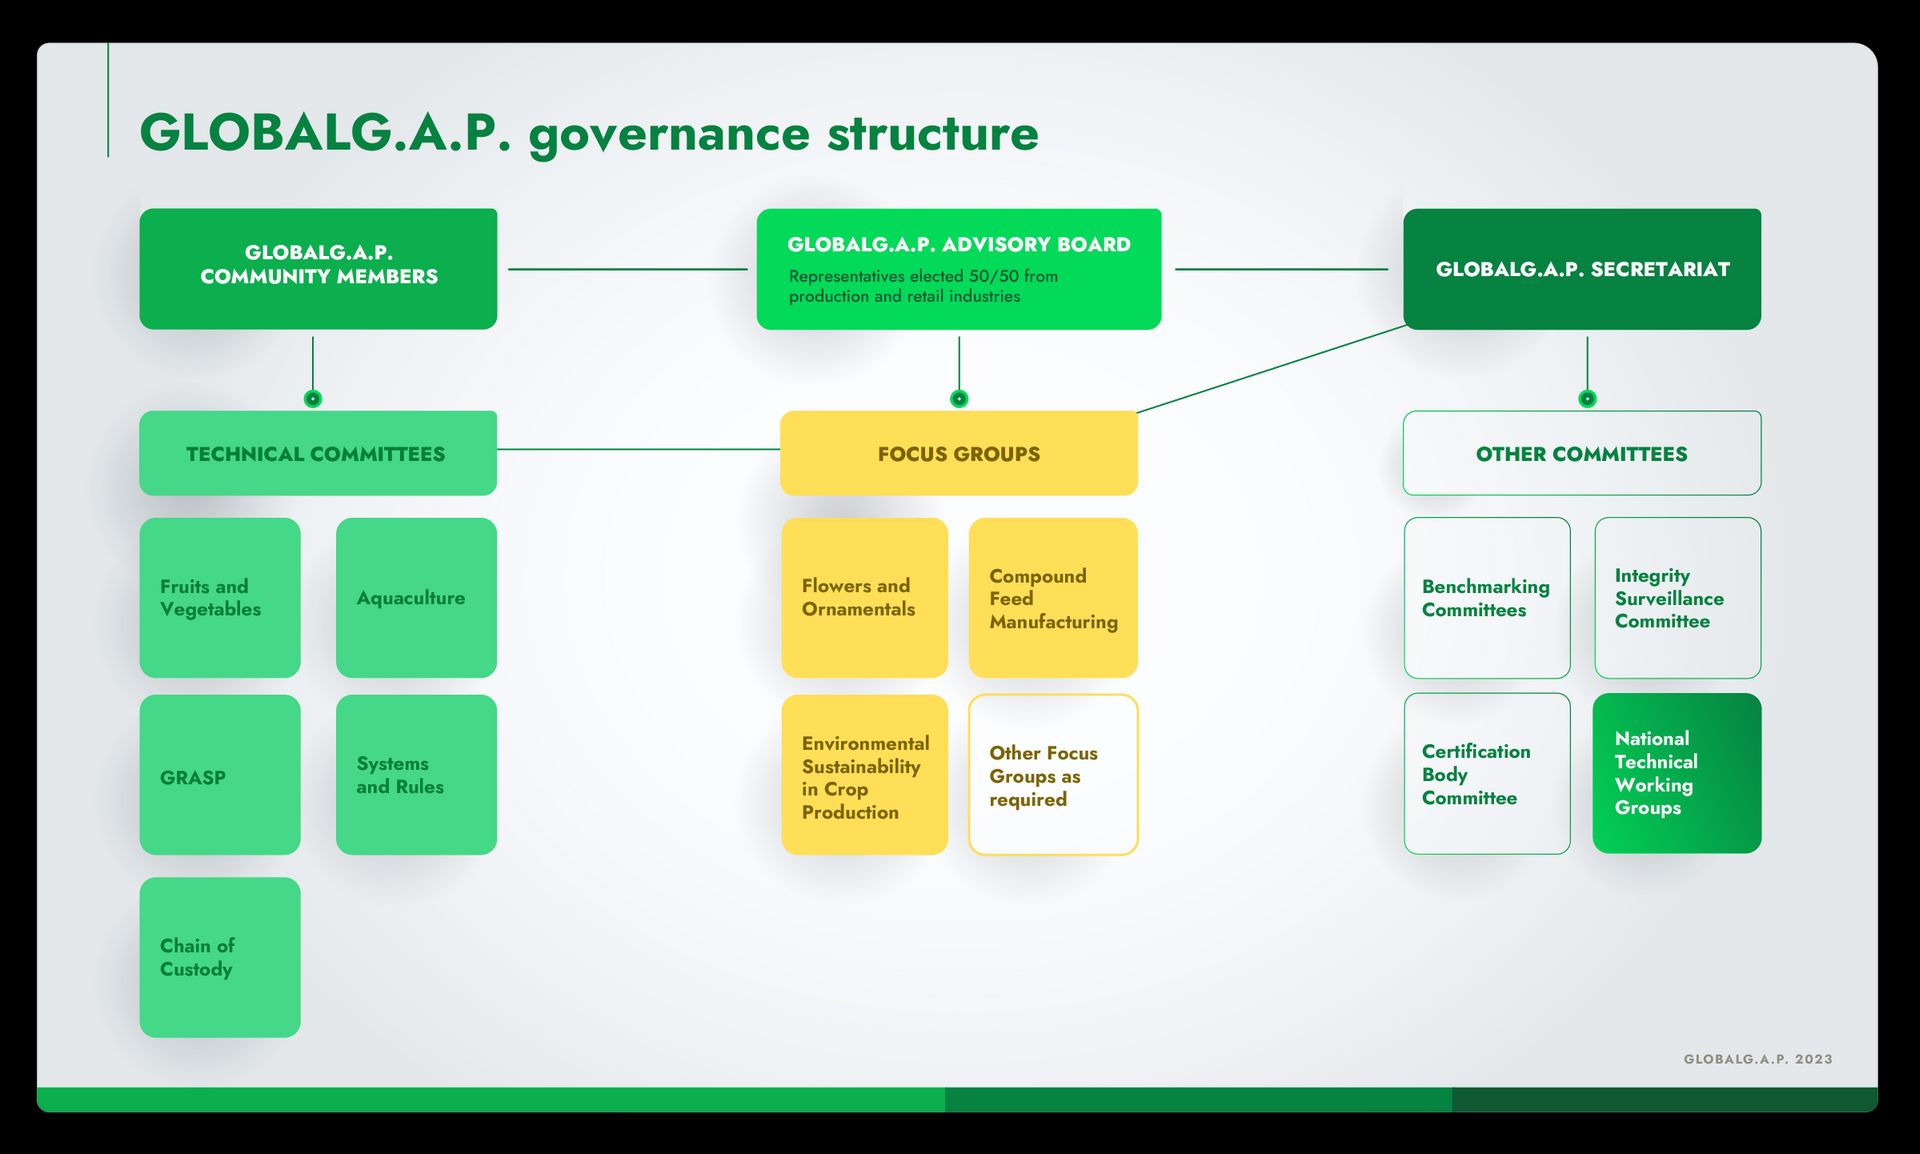 Infographic showing groups that contribute to the GLOBALG.A.P. governance structure